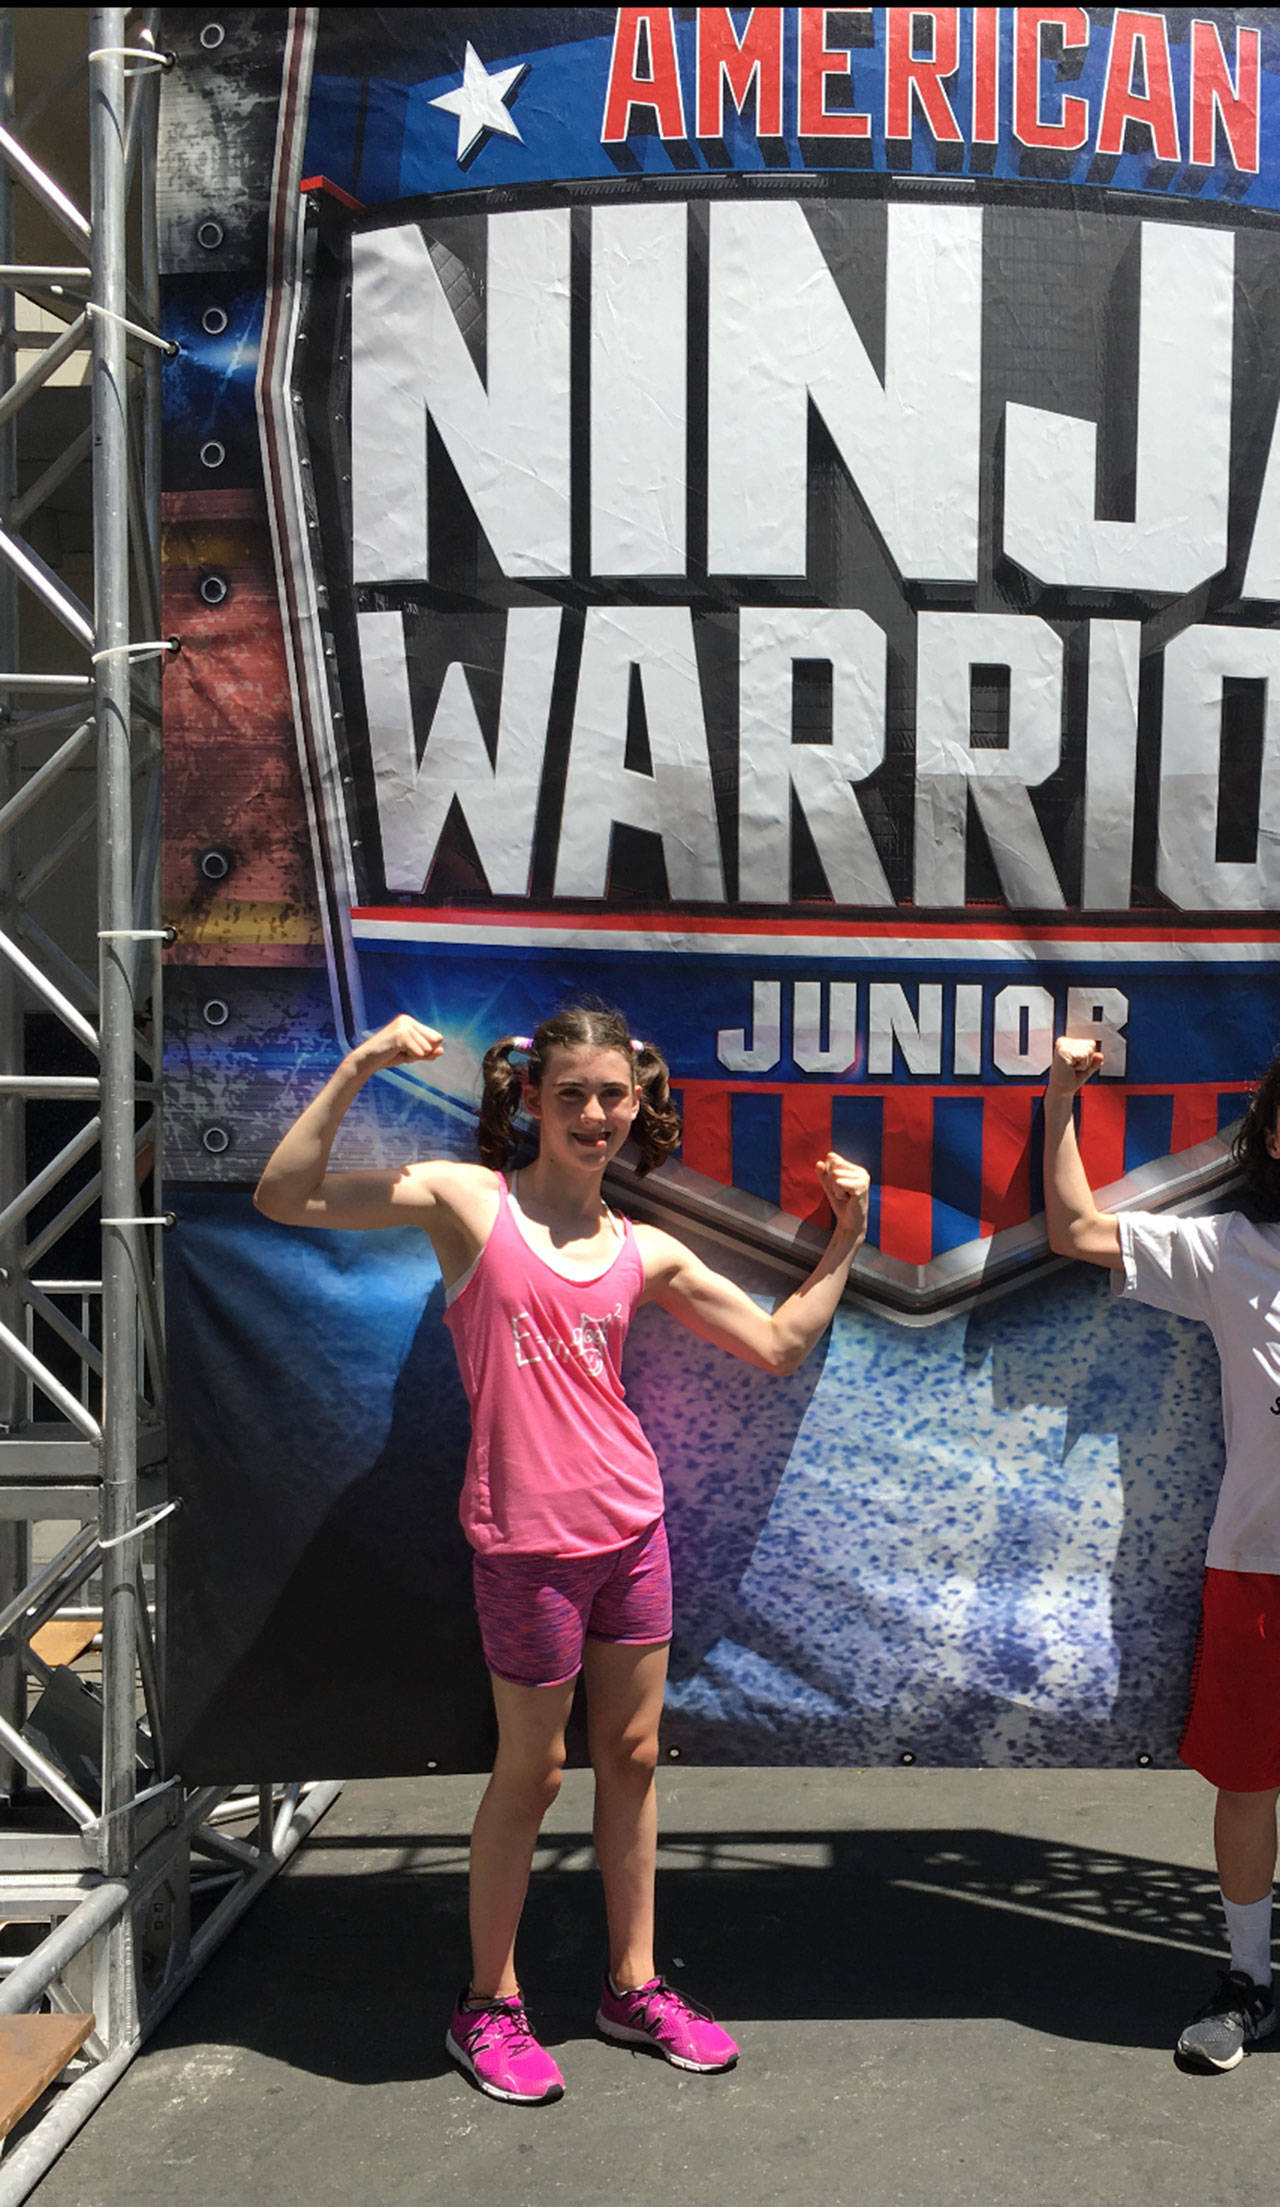 Image courtesy of Melissa McRitchie | Ella McRitchie, a 13-year-old Woodward Middle School seventh grader, is one of about 200 kids set to compete in the debut season of American Ninja Warrior Junior.